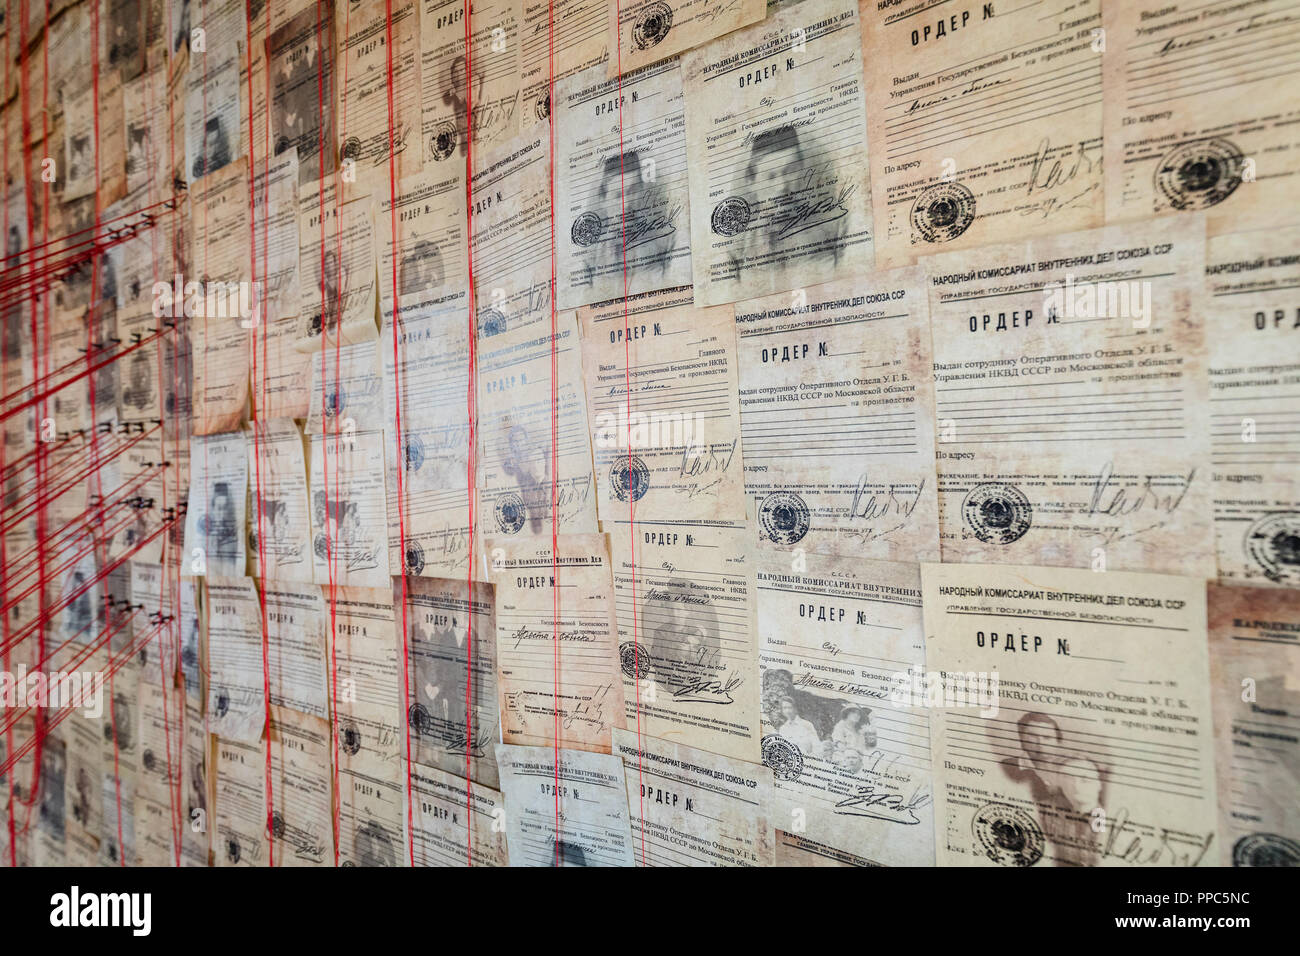 London, UK. 25th September 2018. Detail within Machine by Asel Kadyrkhanova, which commemorates millions of nameless victims of the Great Purge in the USSR in the 1930’s, by displaying thousands of arrest warrants with erased data, posing questions of individual participation in collective violence. Credit: Vickie Flores/Alamy Live News Stock Photo